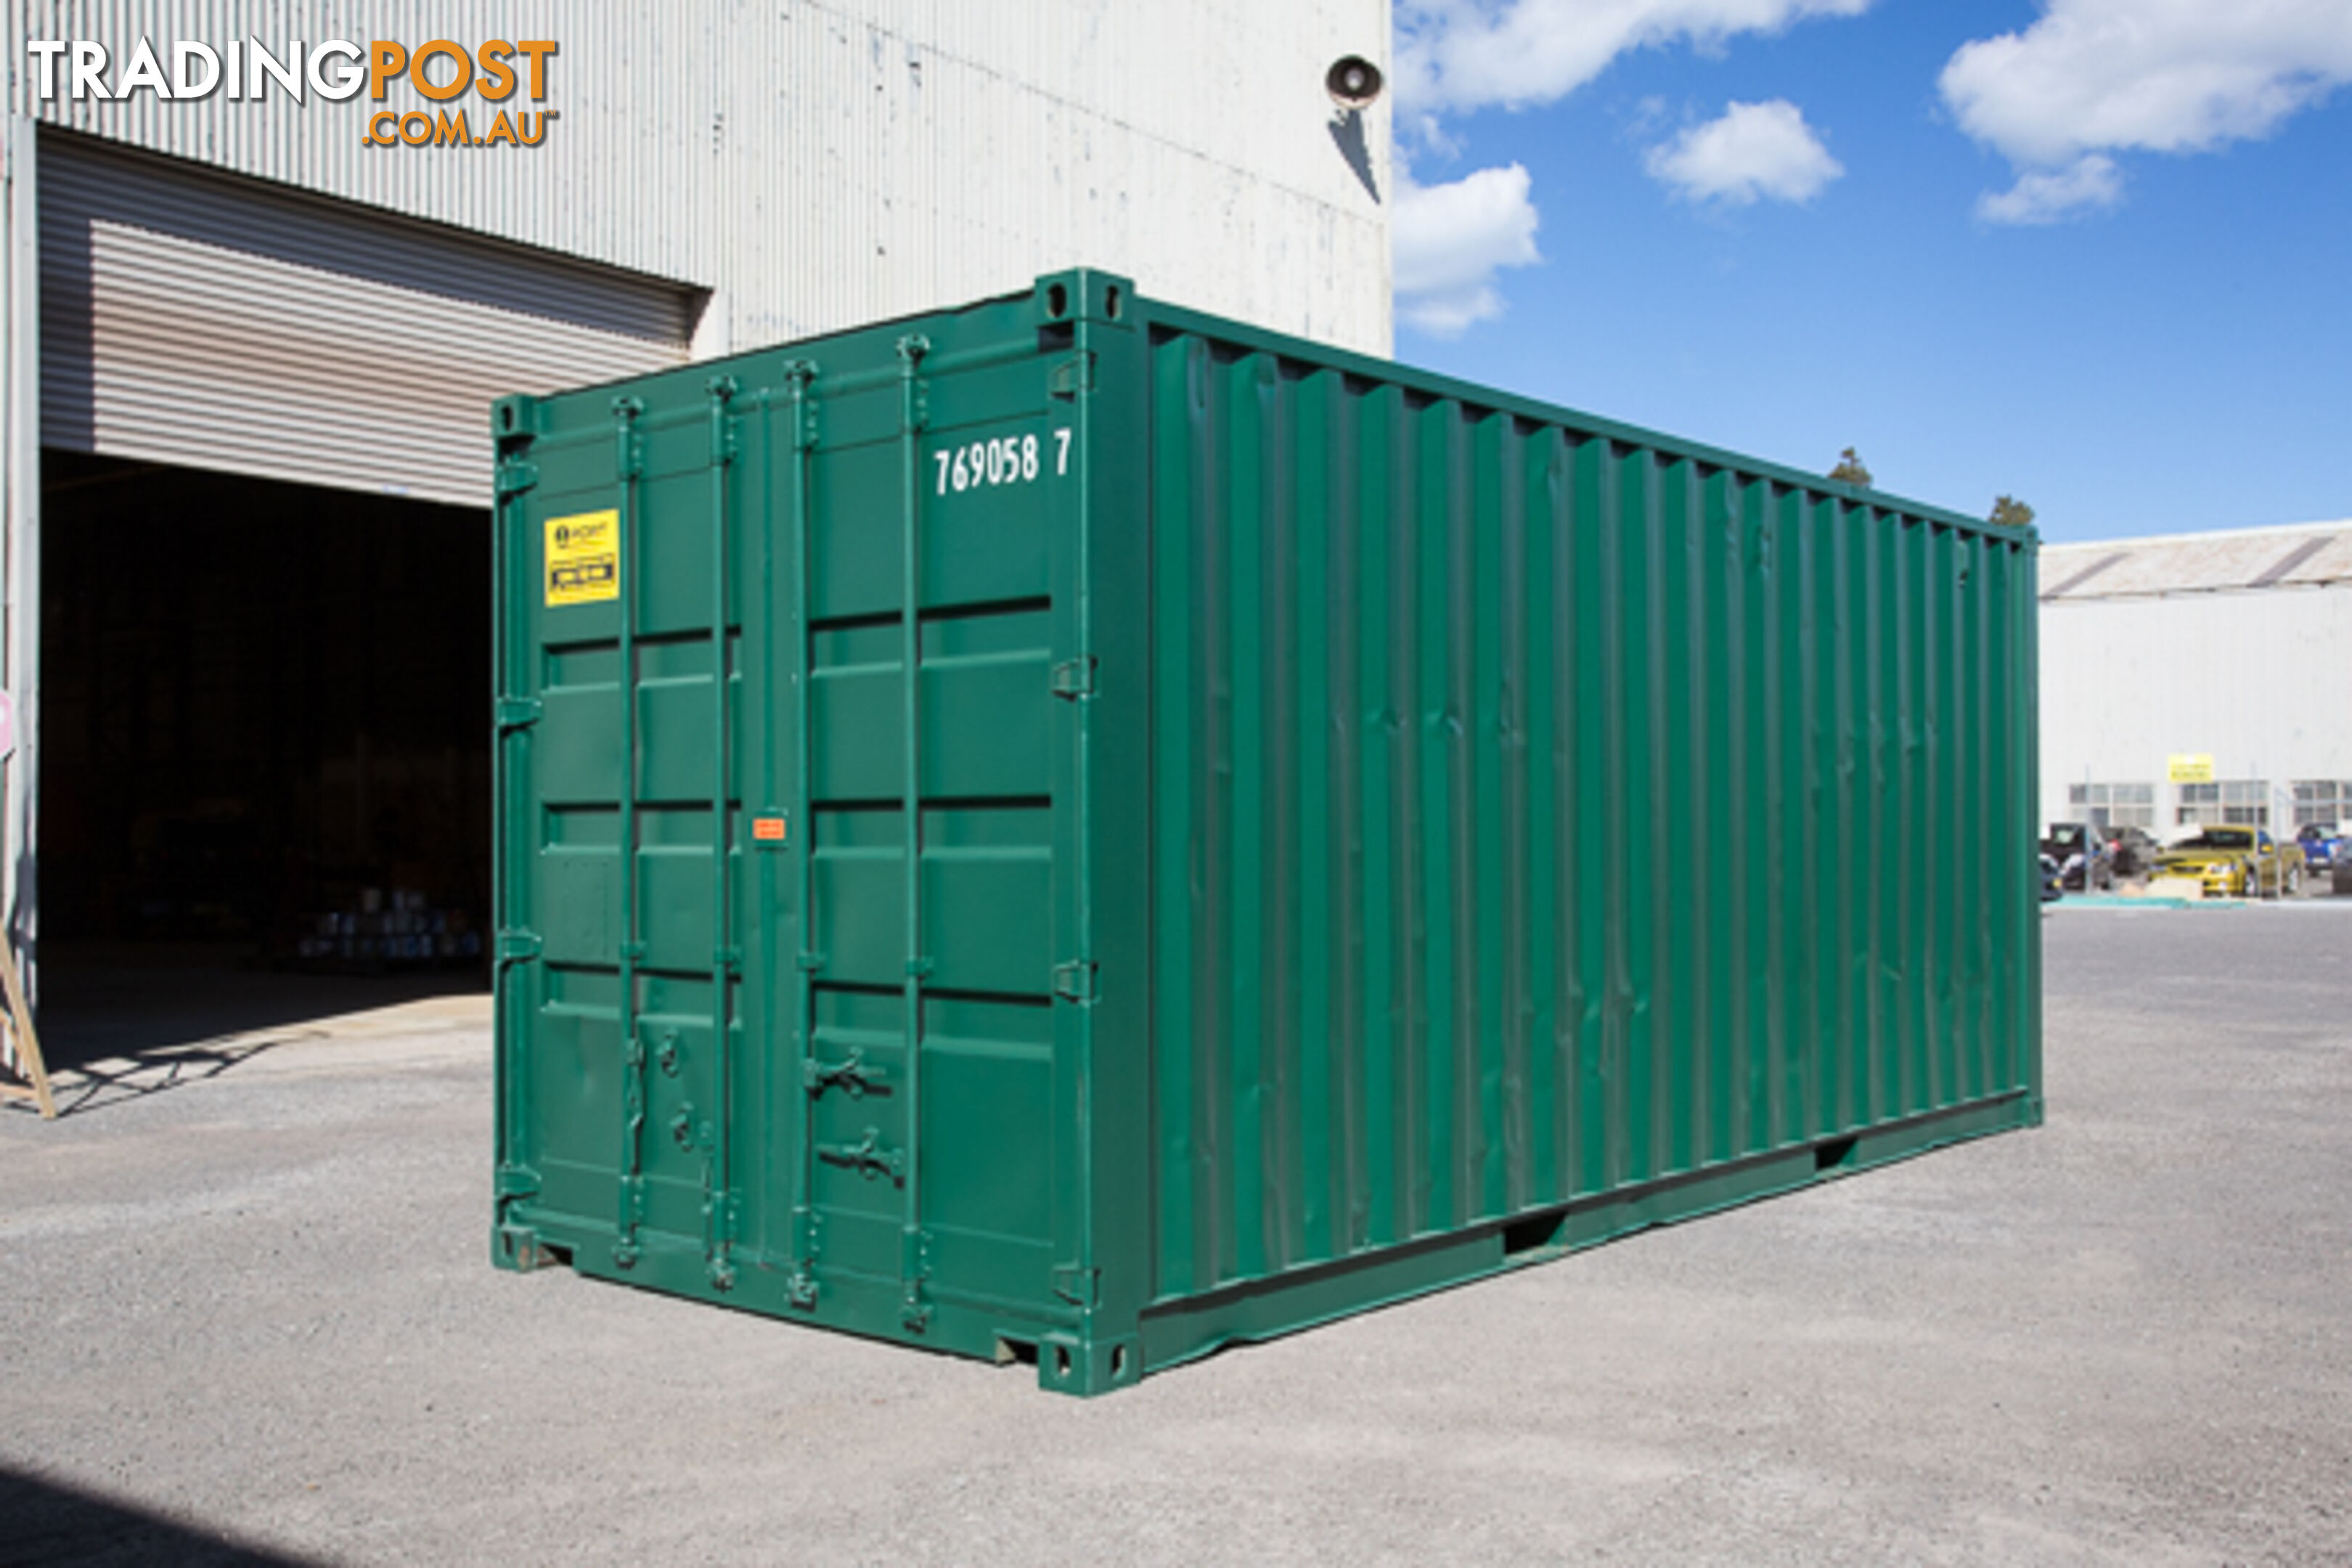 Refurbished Painted 20ft Shipping Containers Bega - From $3950 + GST